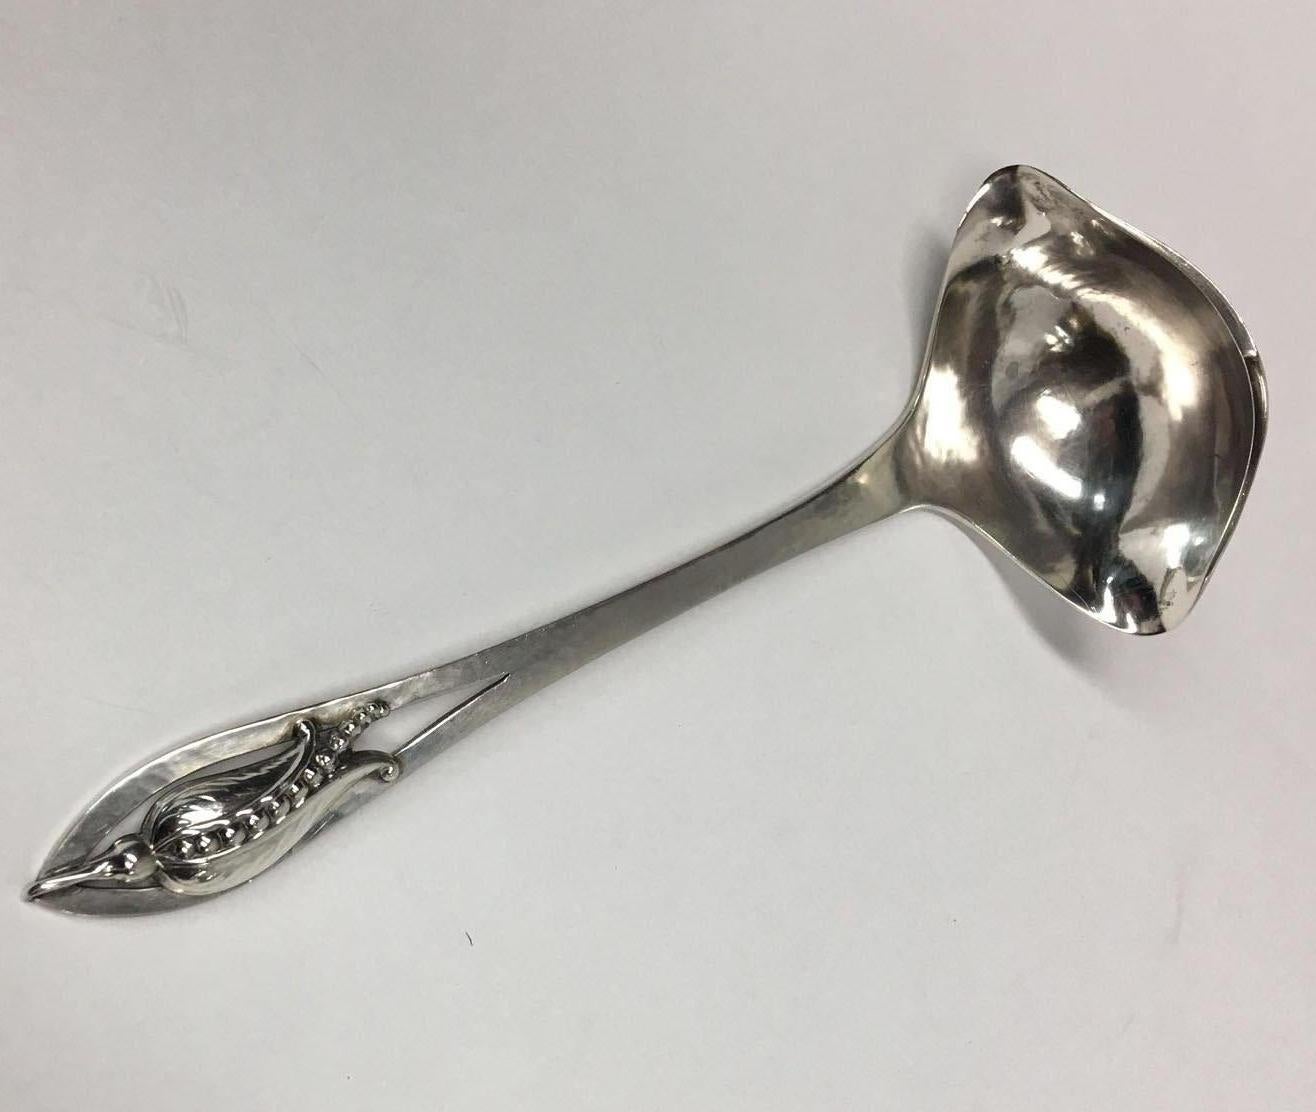 Canadian Iconic Carl Poul Petersen Sterling Silver Ladle 